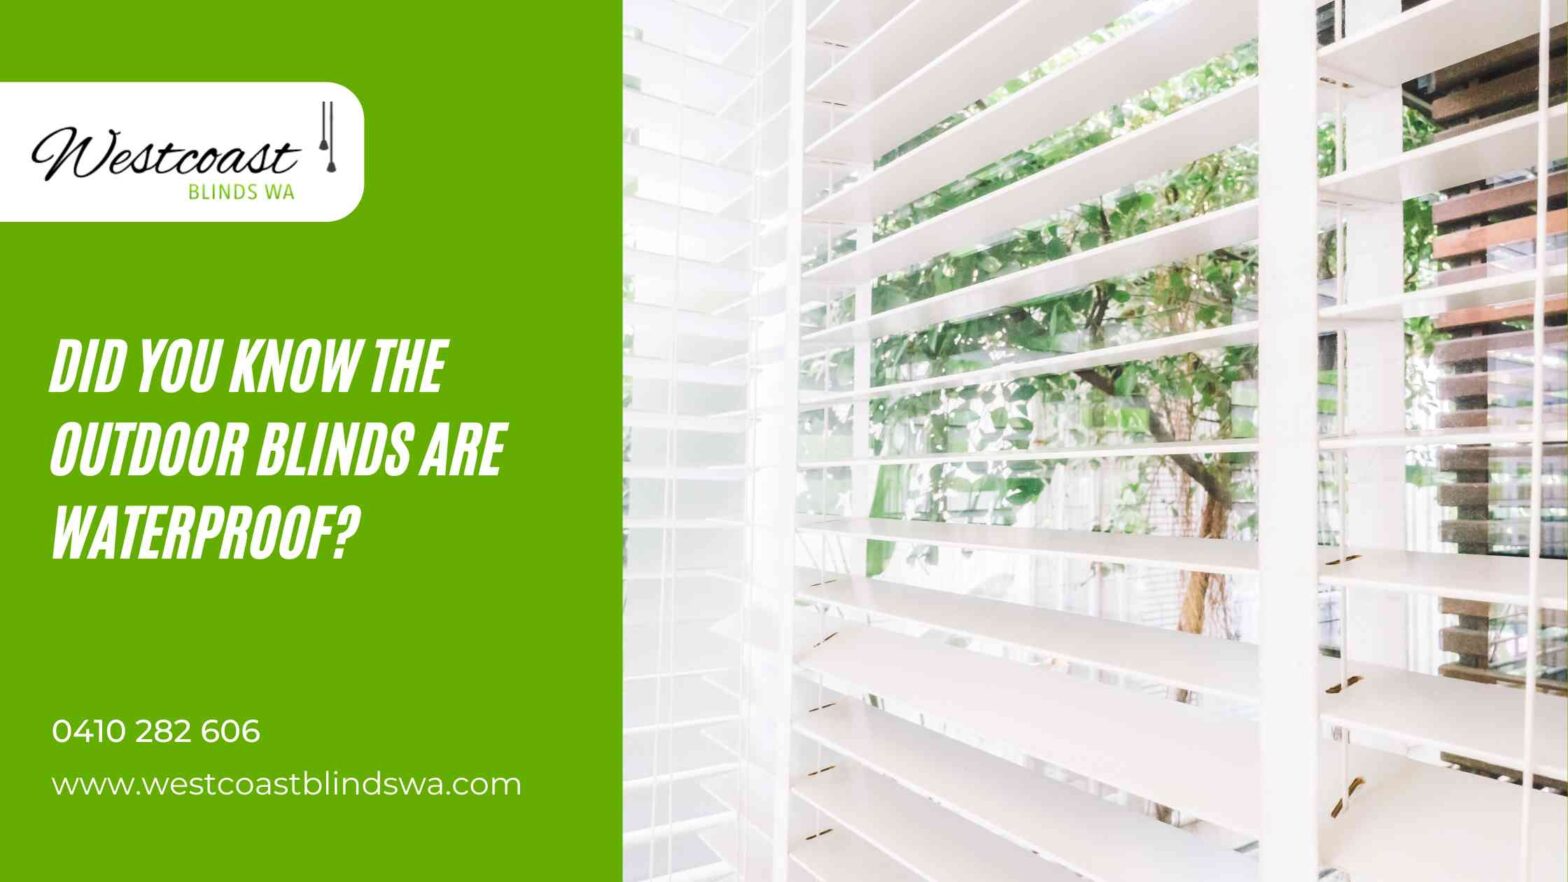 Did You Know The Outdoor Blinds Are Waterproof?